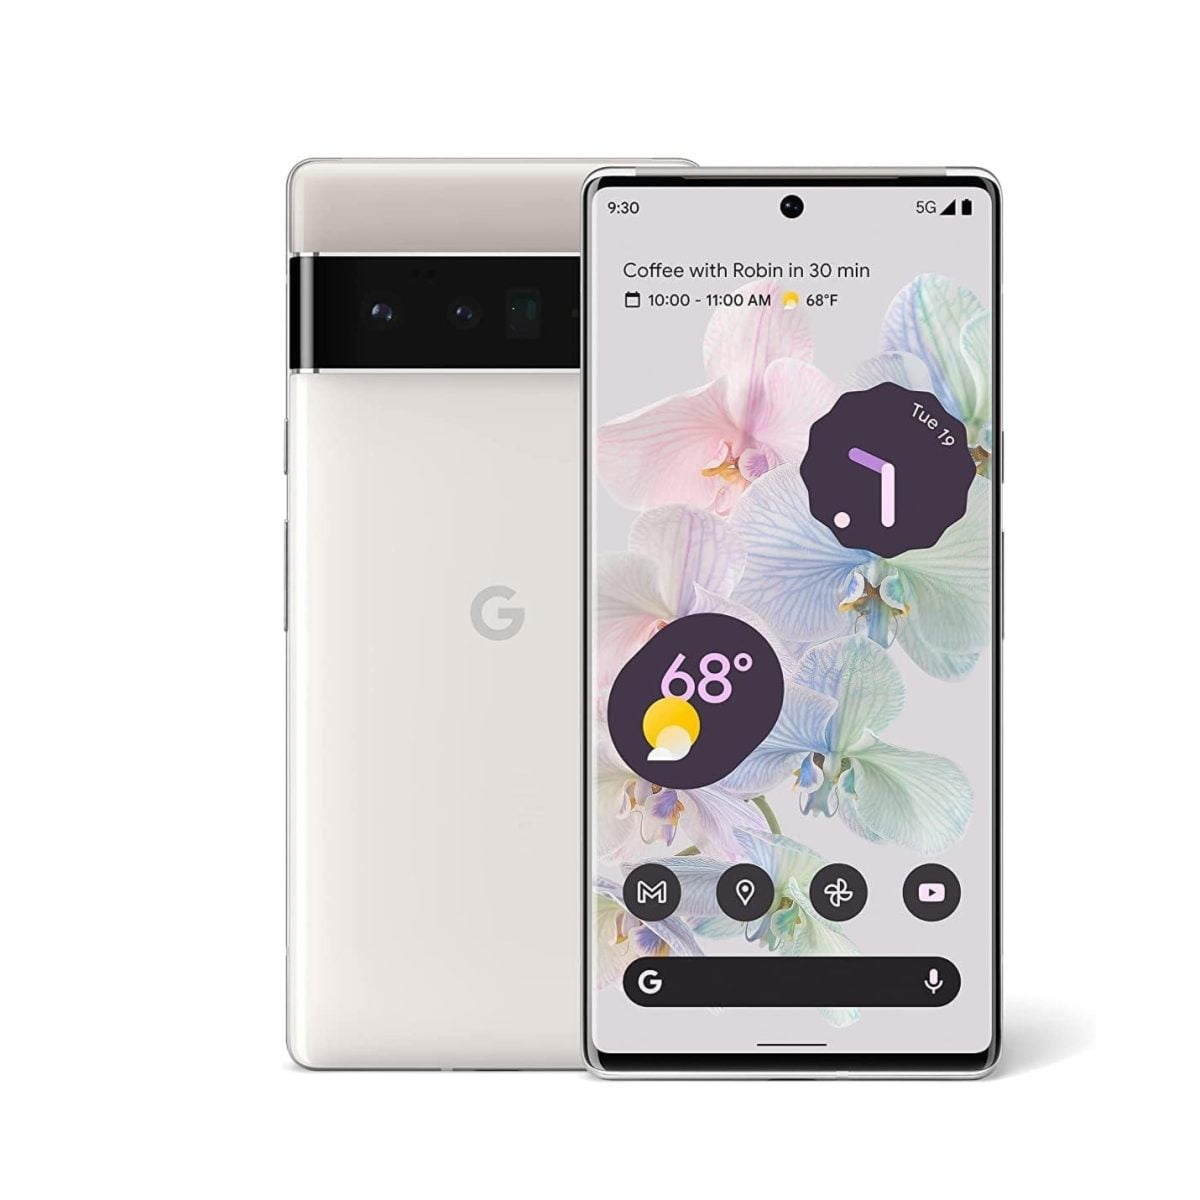 Google Pixel 6 Pro 5G Android Phone 128Gb - Cloudy White Ga03165-Gb